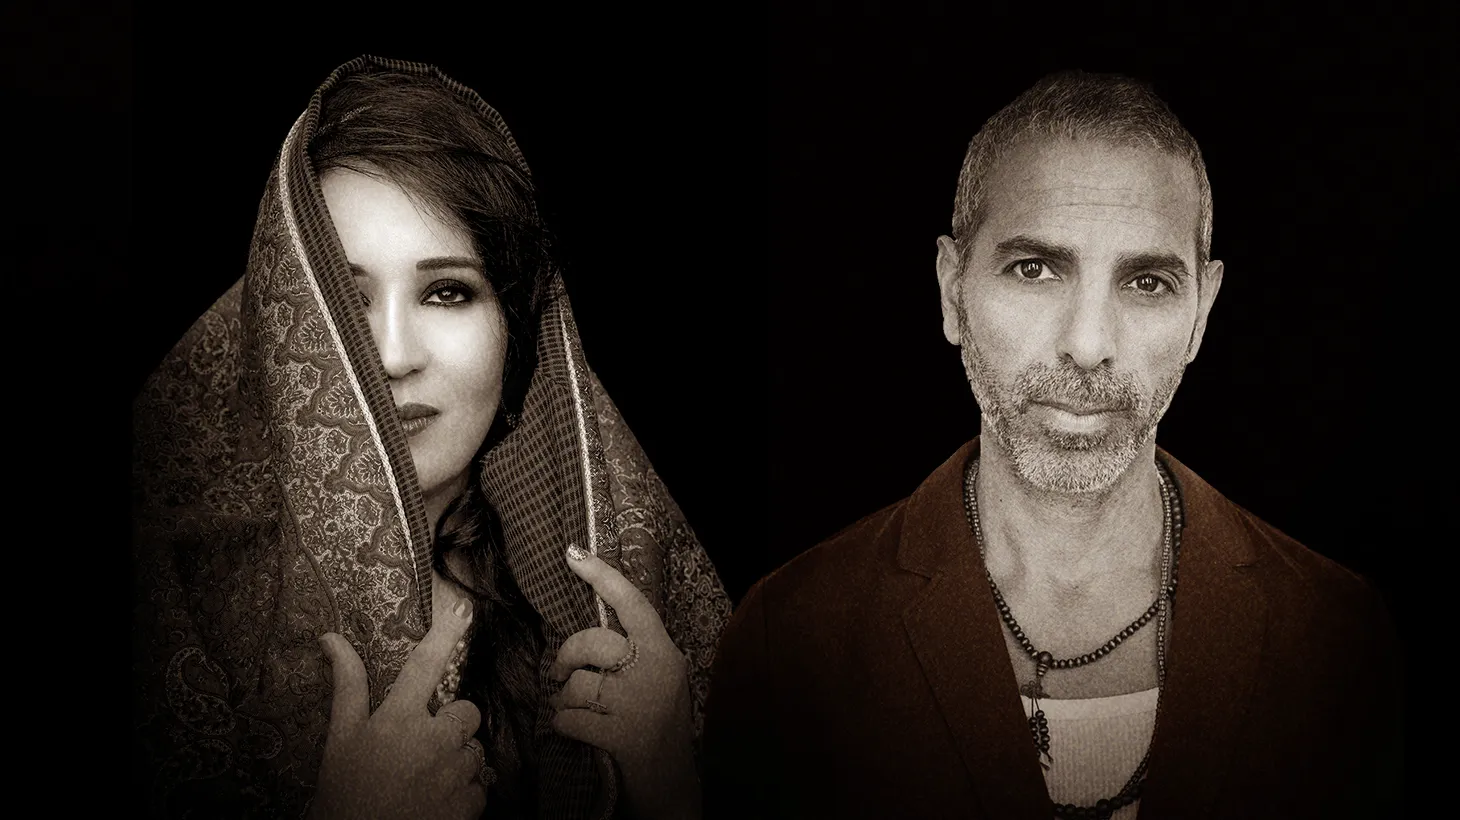 Carmen Rizzo and Meriem Ben Amor are the Tunisian-American electro duo behind Didon. Move your hips to the trance-inducing sound of “A Faraway Land” with its Arabic and North African undulations.